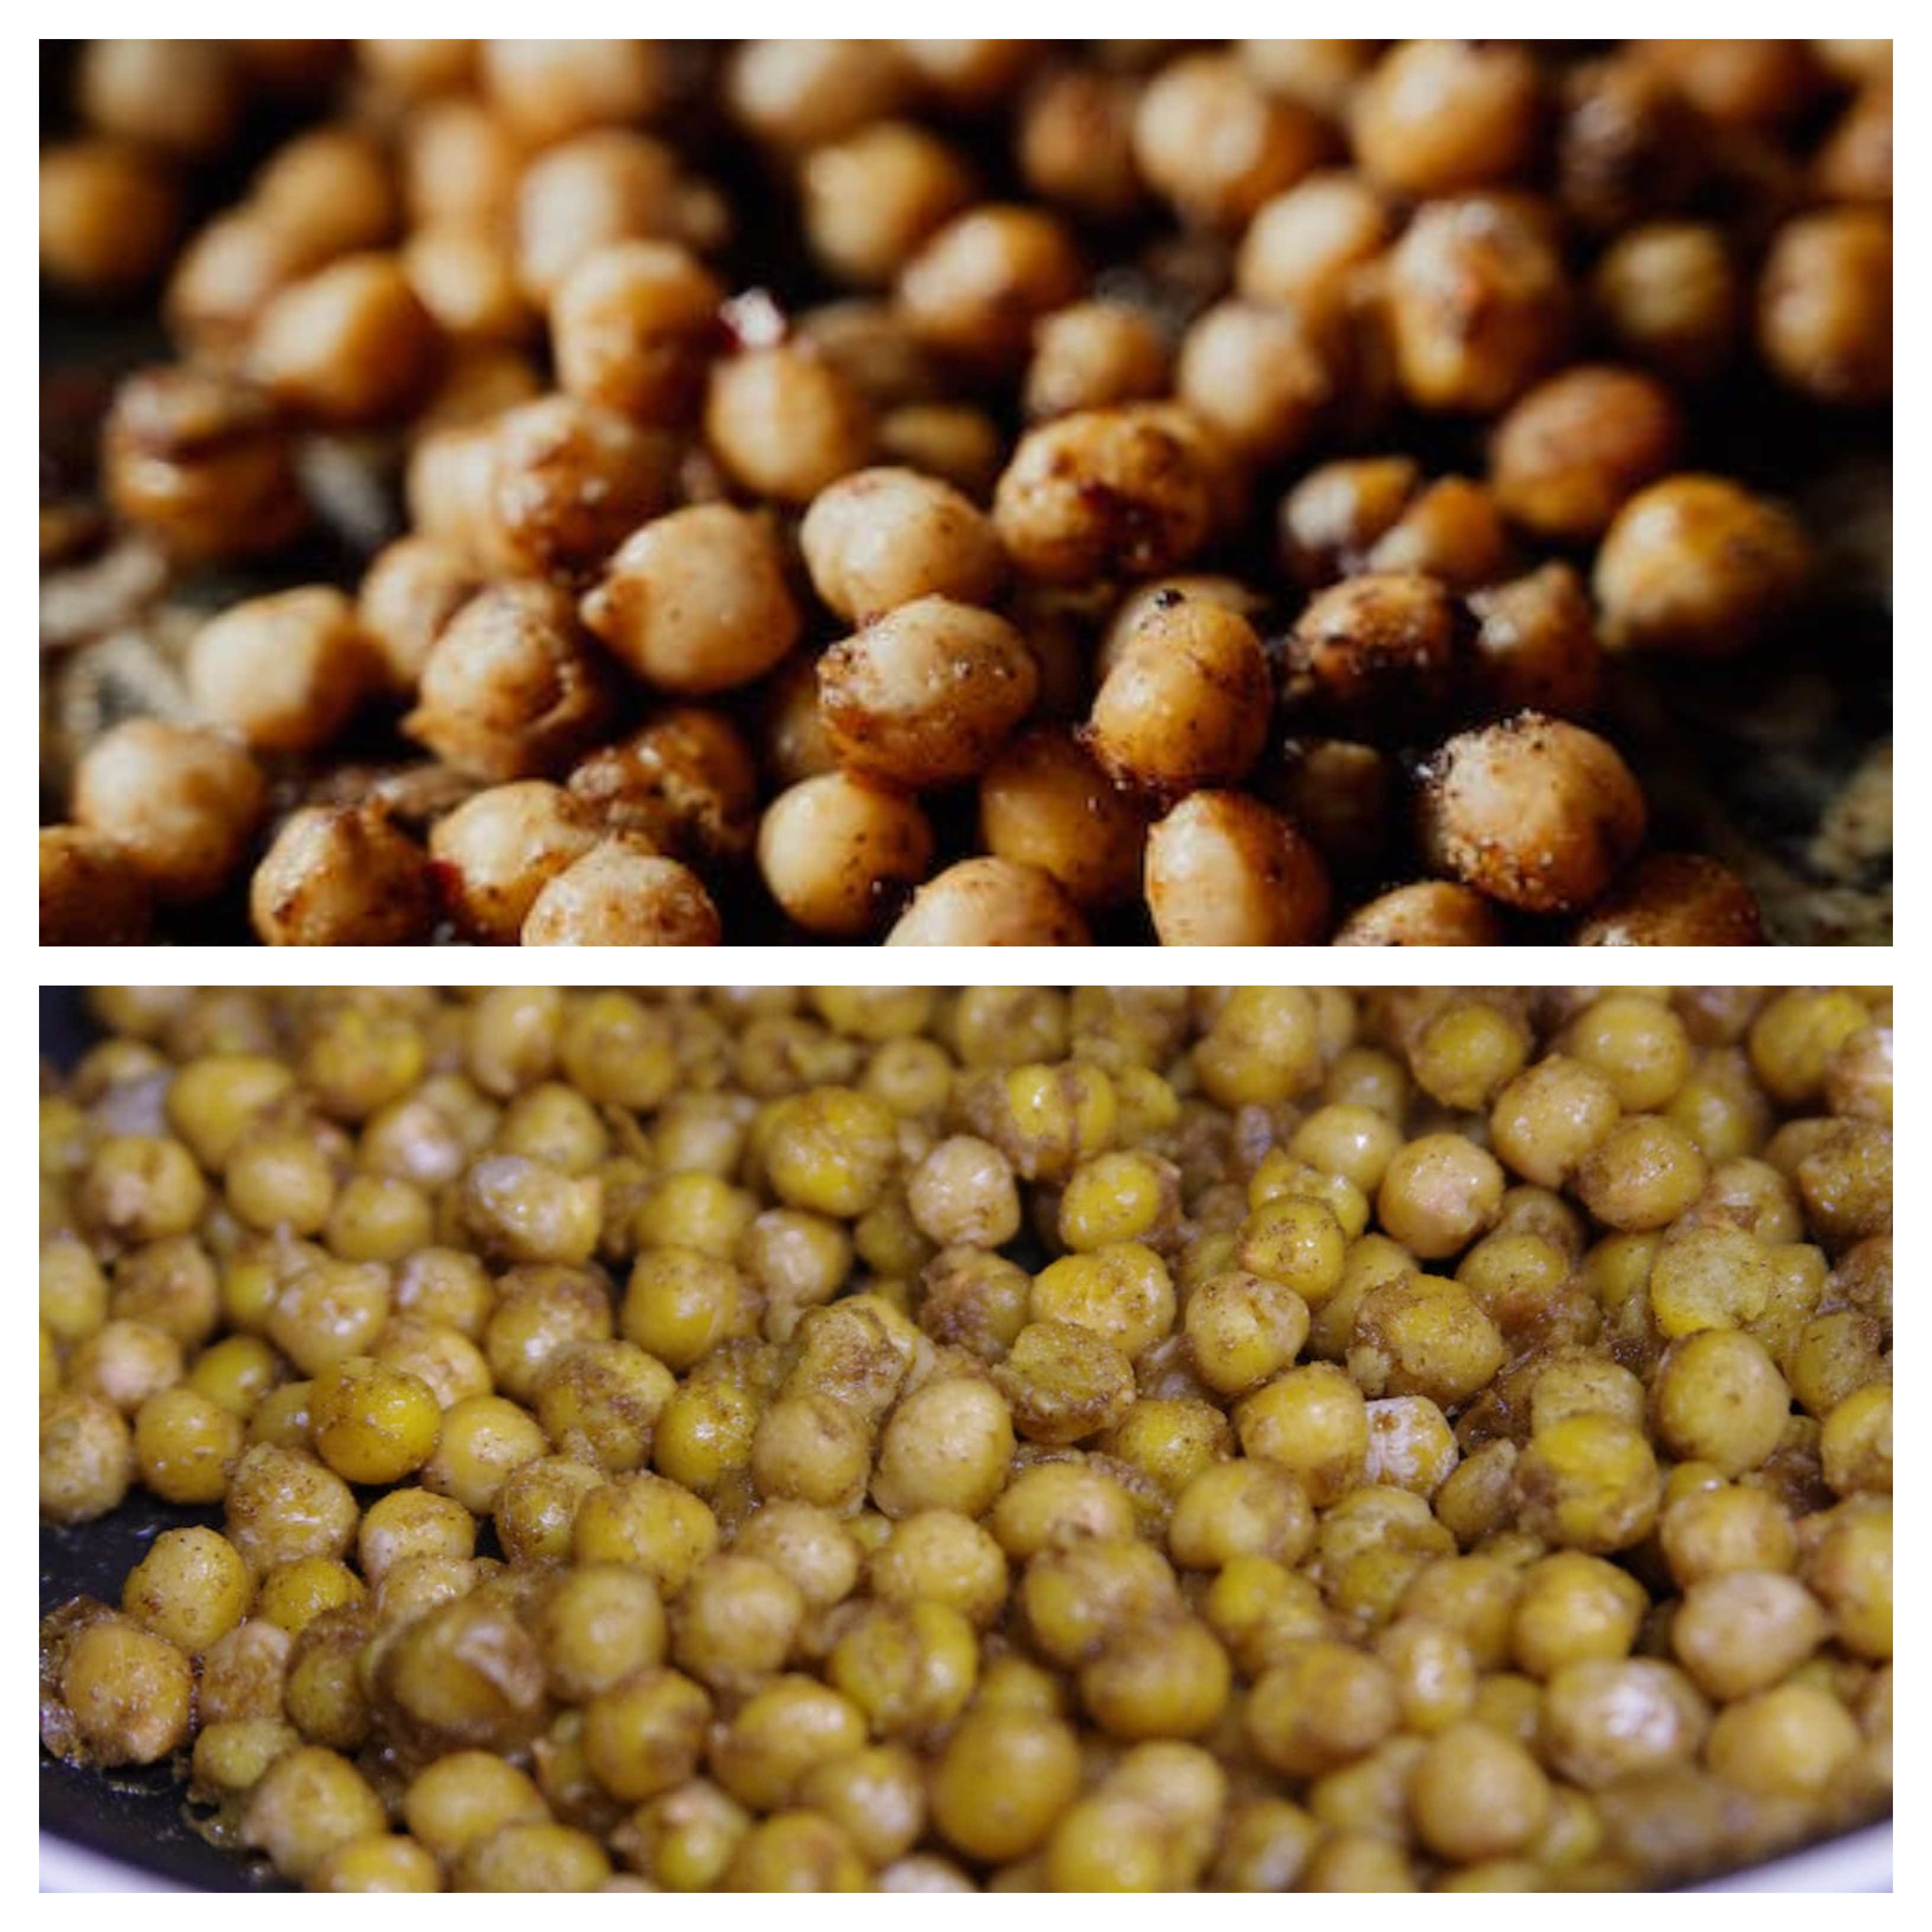 Top 10 chickpeas recipes that you must try